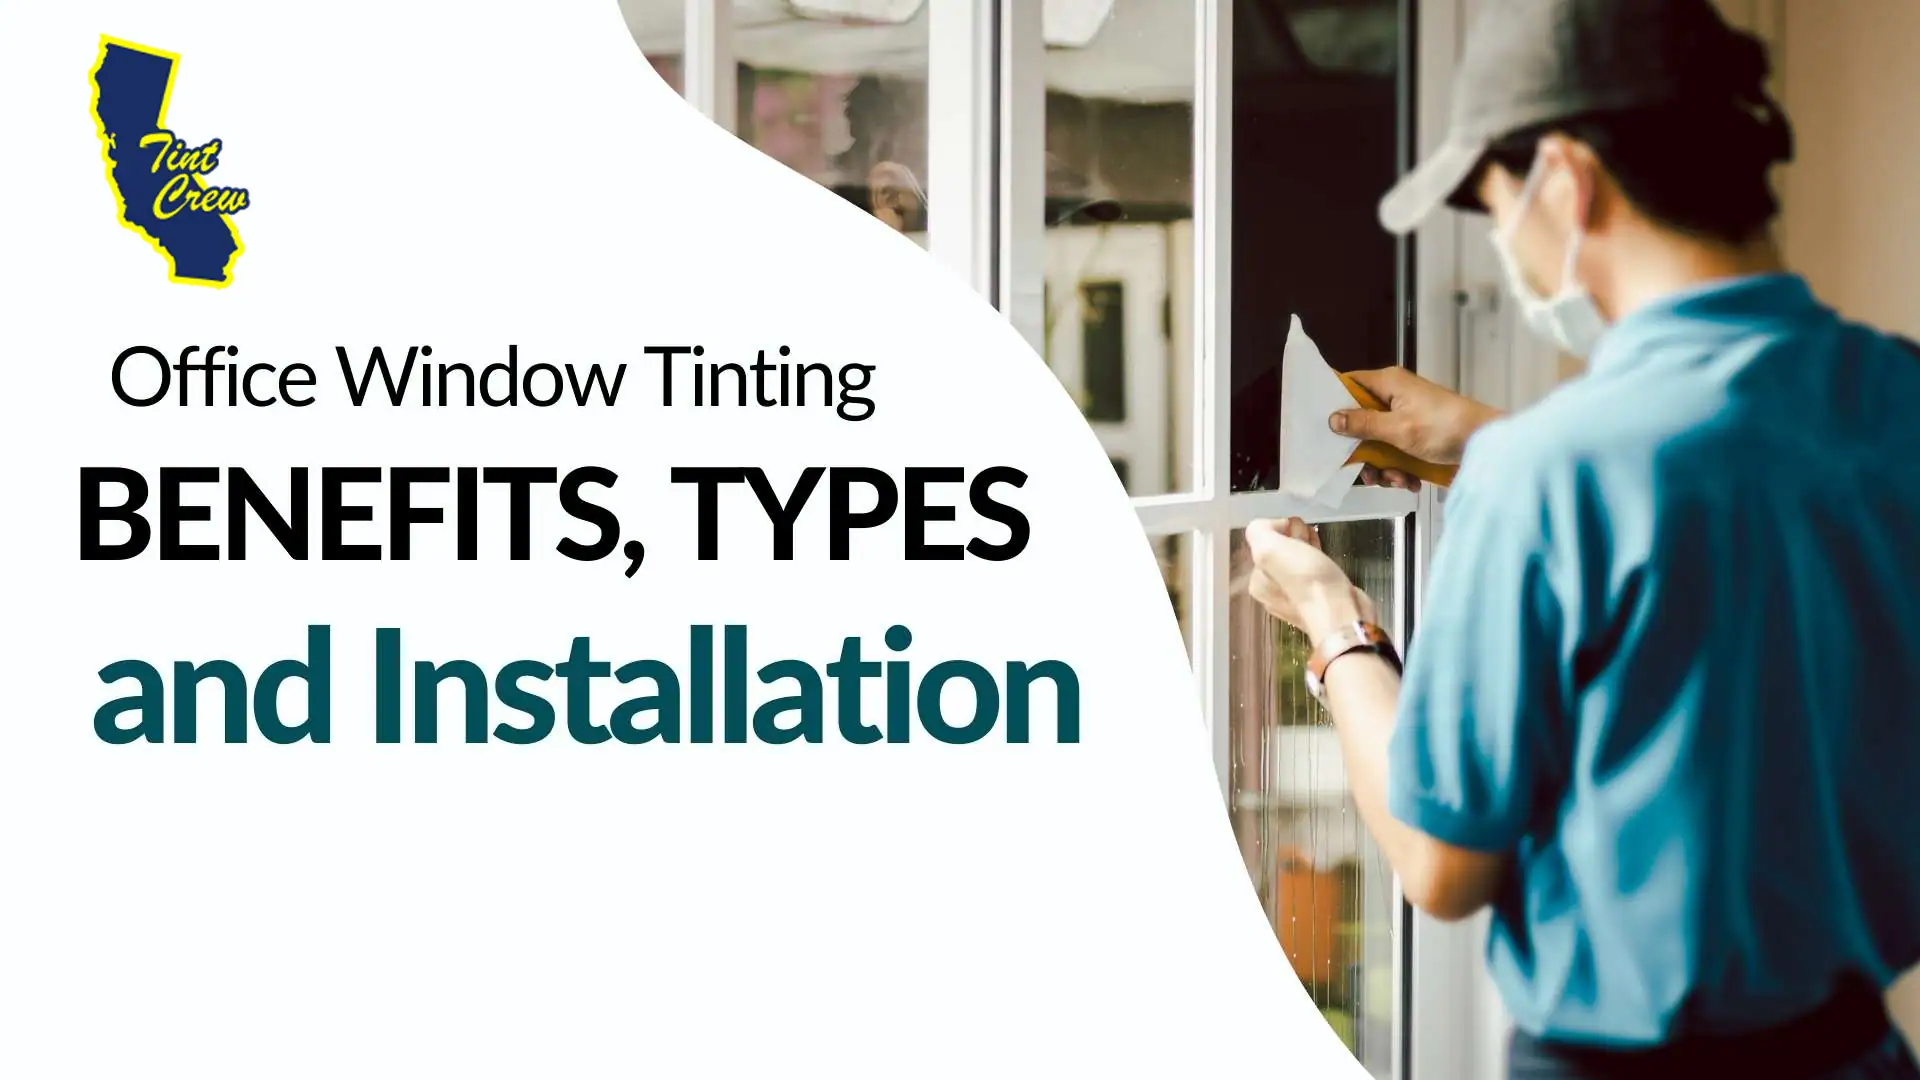 Office Window Tinting: Benefits, Types, and Installation